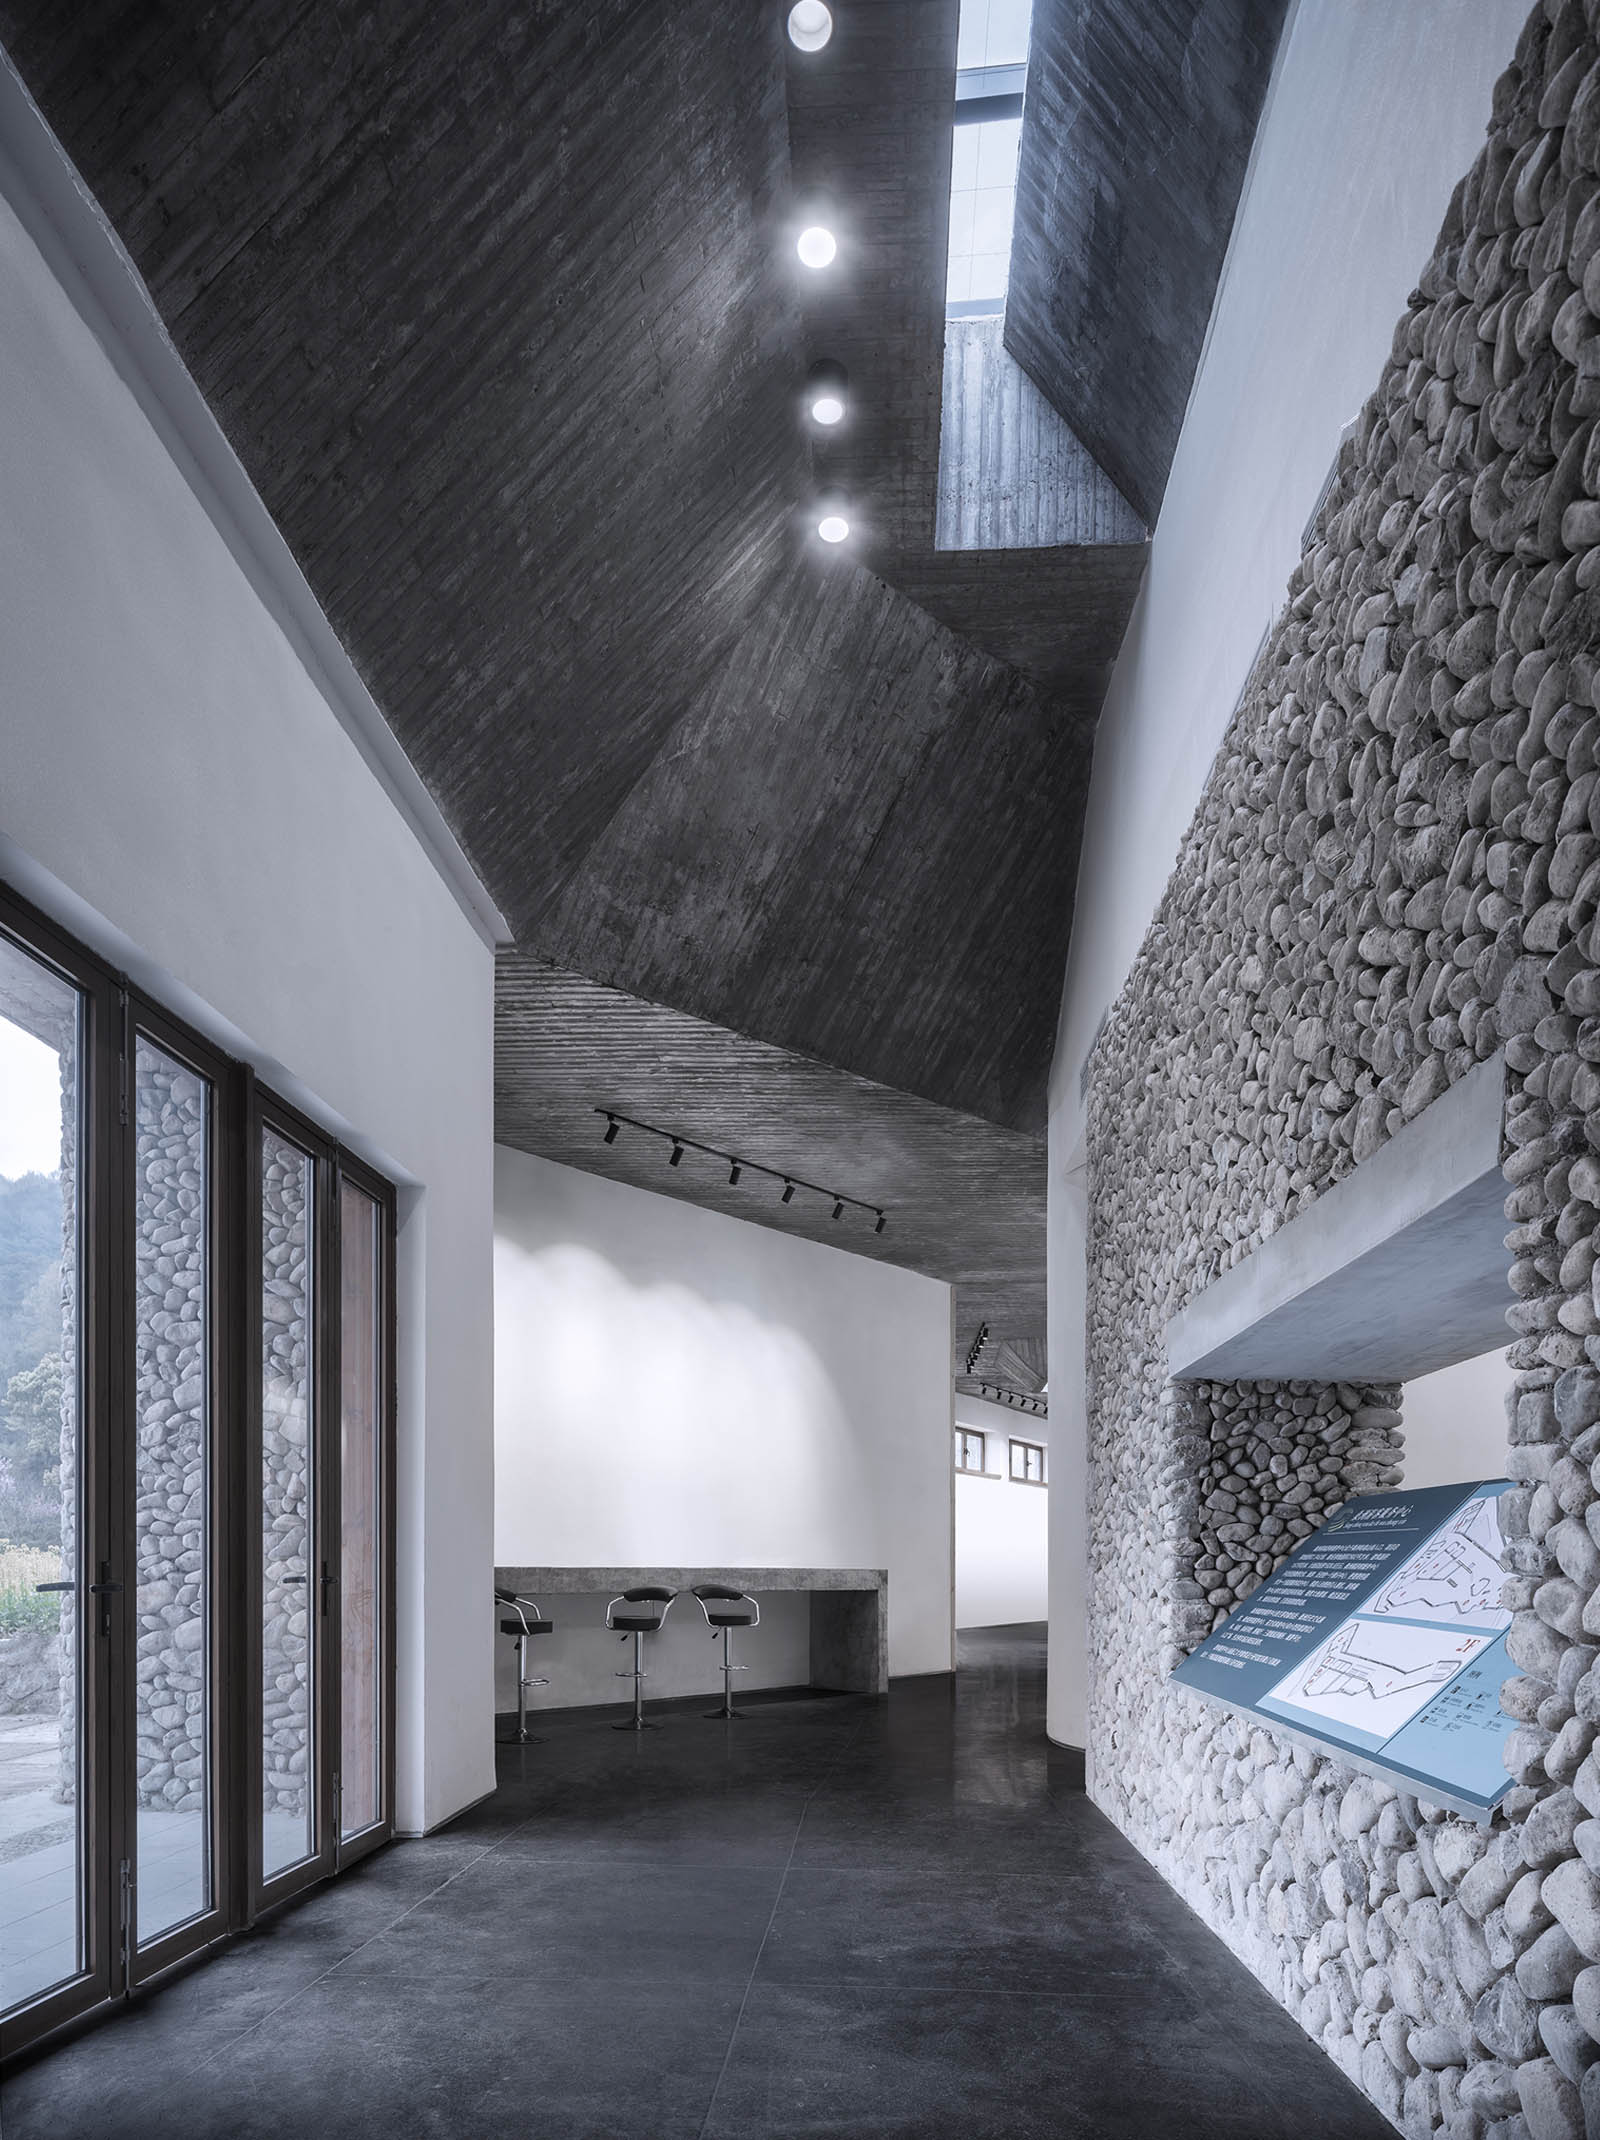 Image of 20221206 UAD QingxiMuseum ZYStudio 3 in Qingxi Culture and History Museum - Cosentino